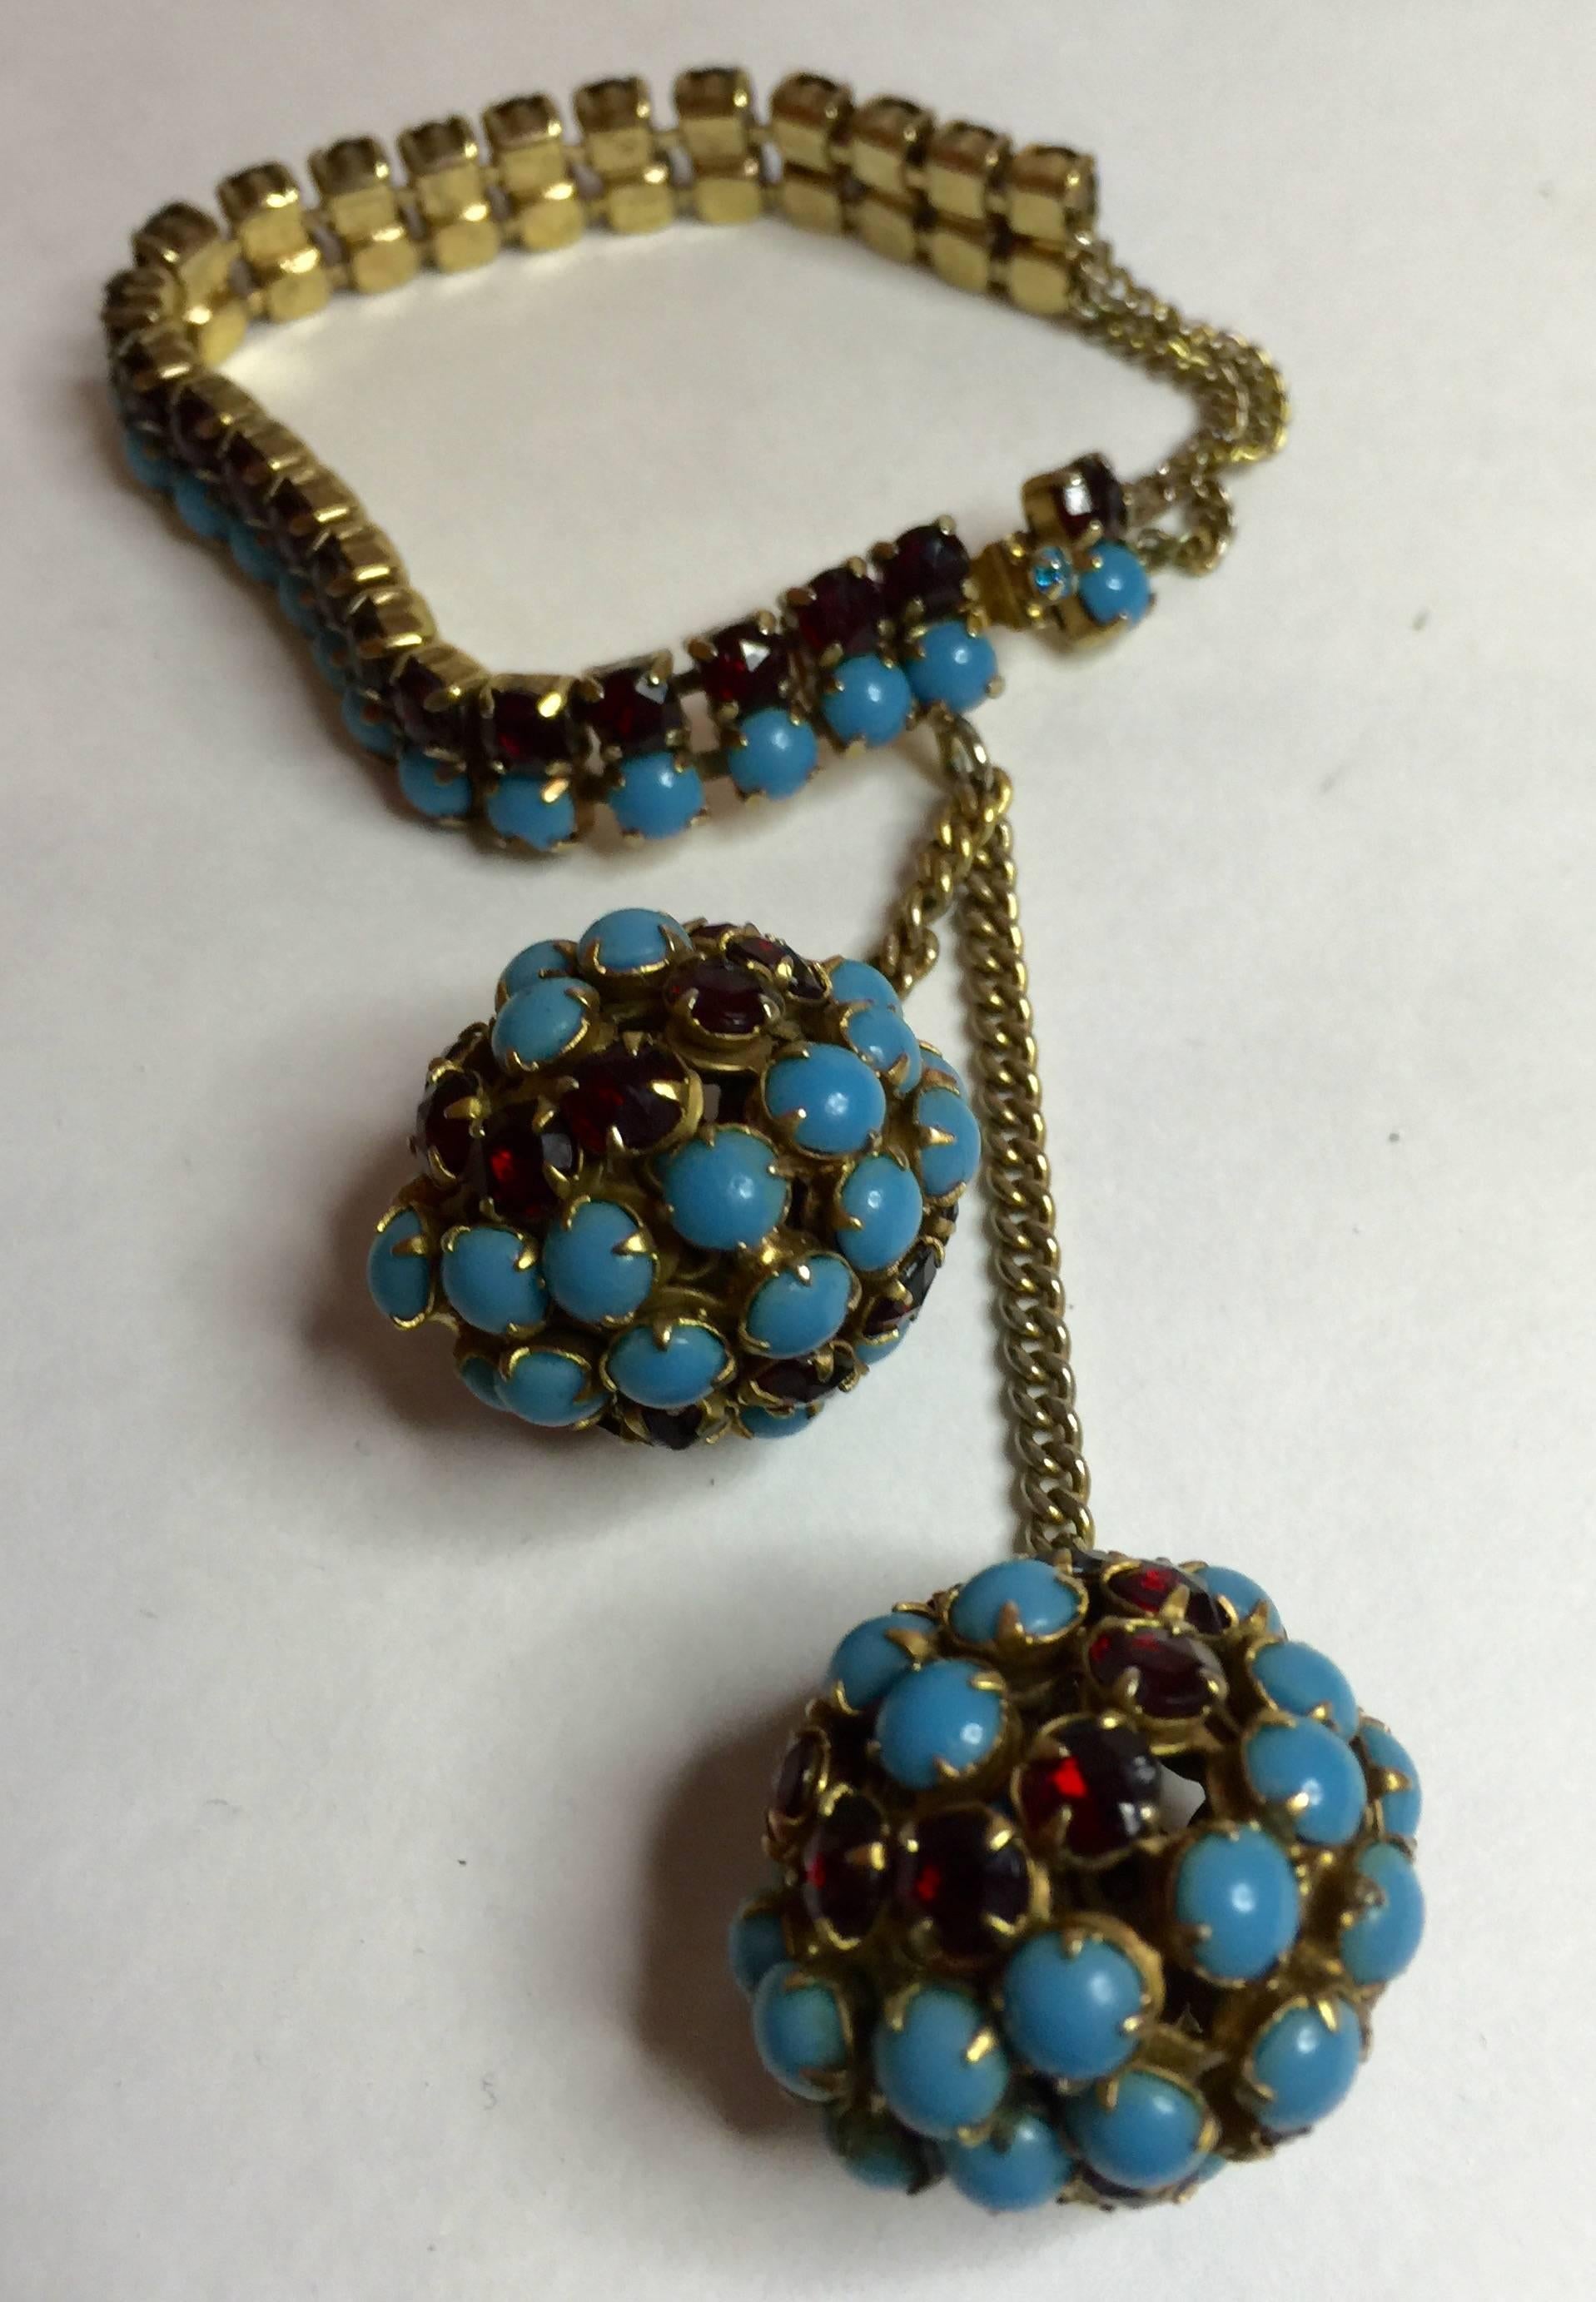 This 1950s HATTIE CARNEGIE Faux Turquoise and Ruby Retro Style Double Ball Drop bracelet is a highly elegant and unusually designed necklace with a classic stone color combination and asymetrical design which is always alluring and appealing. The